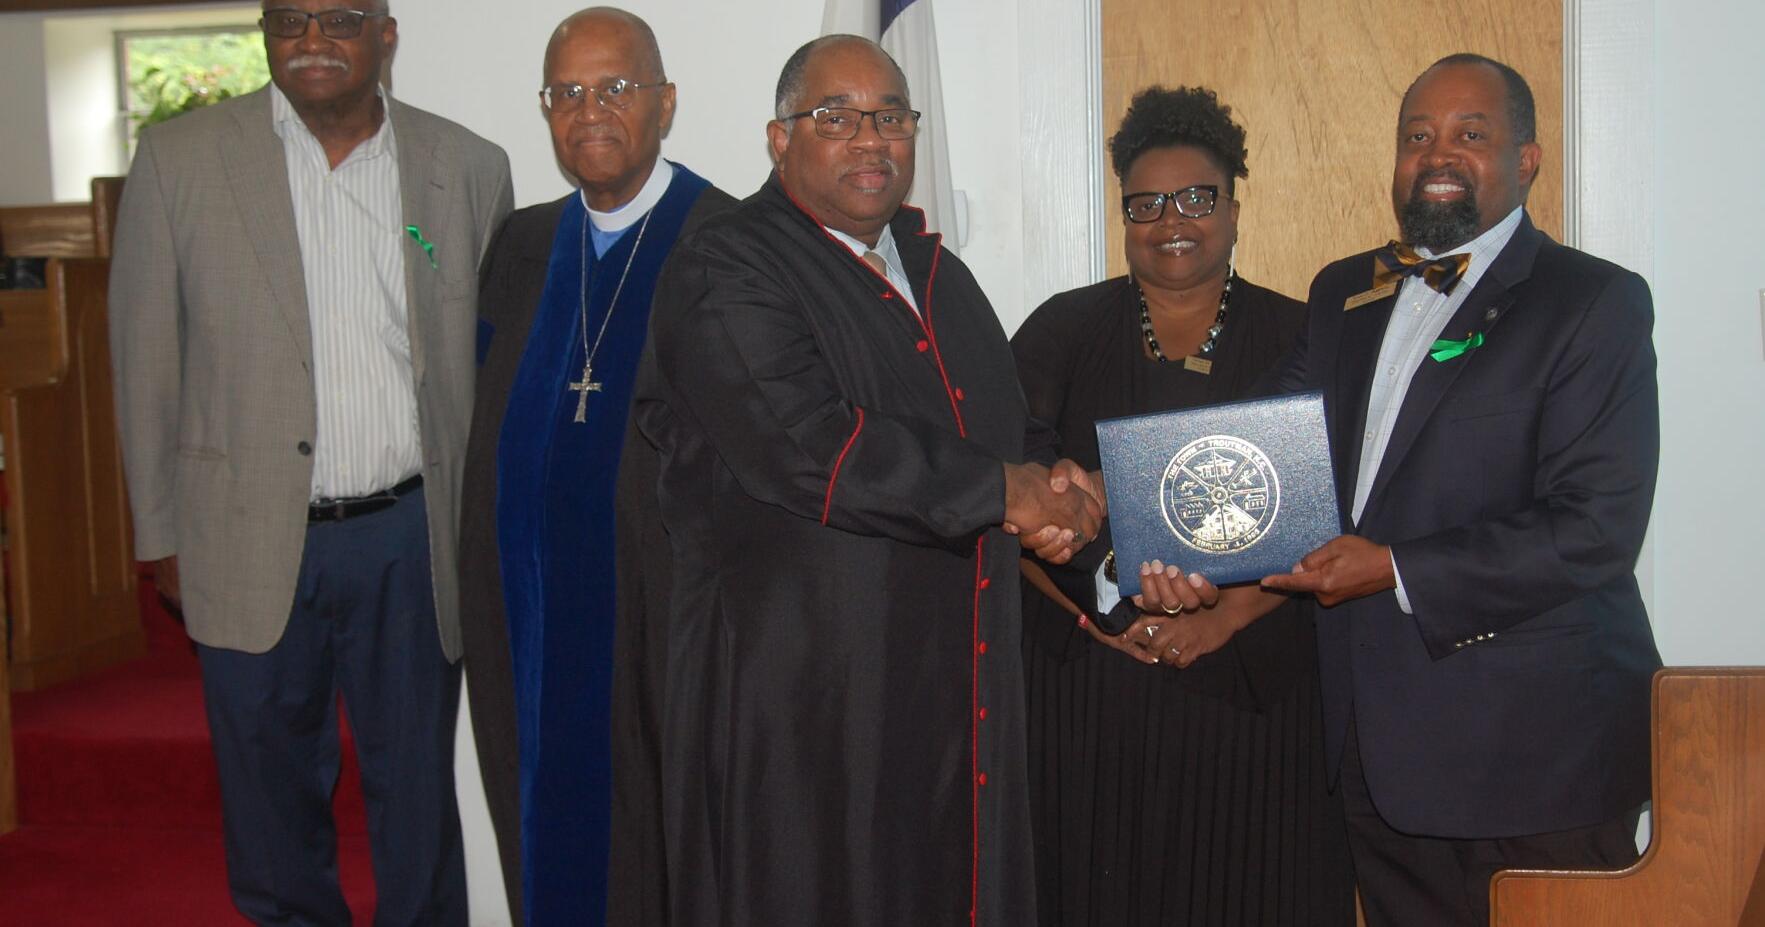 Troutman's Zion Wesley AME Church recognized as historical landmark